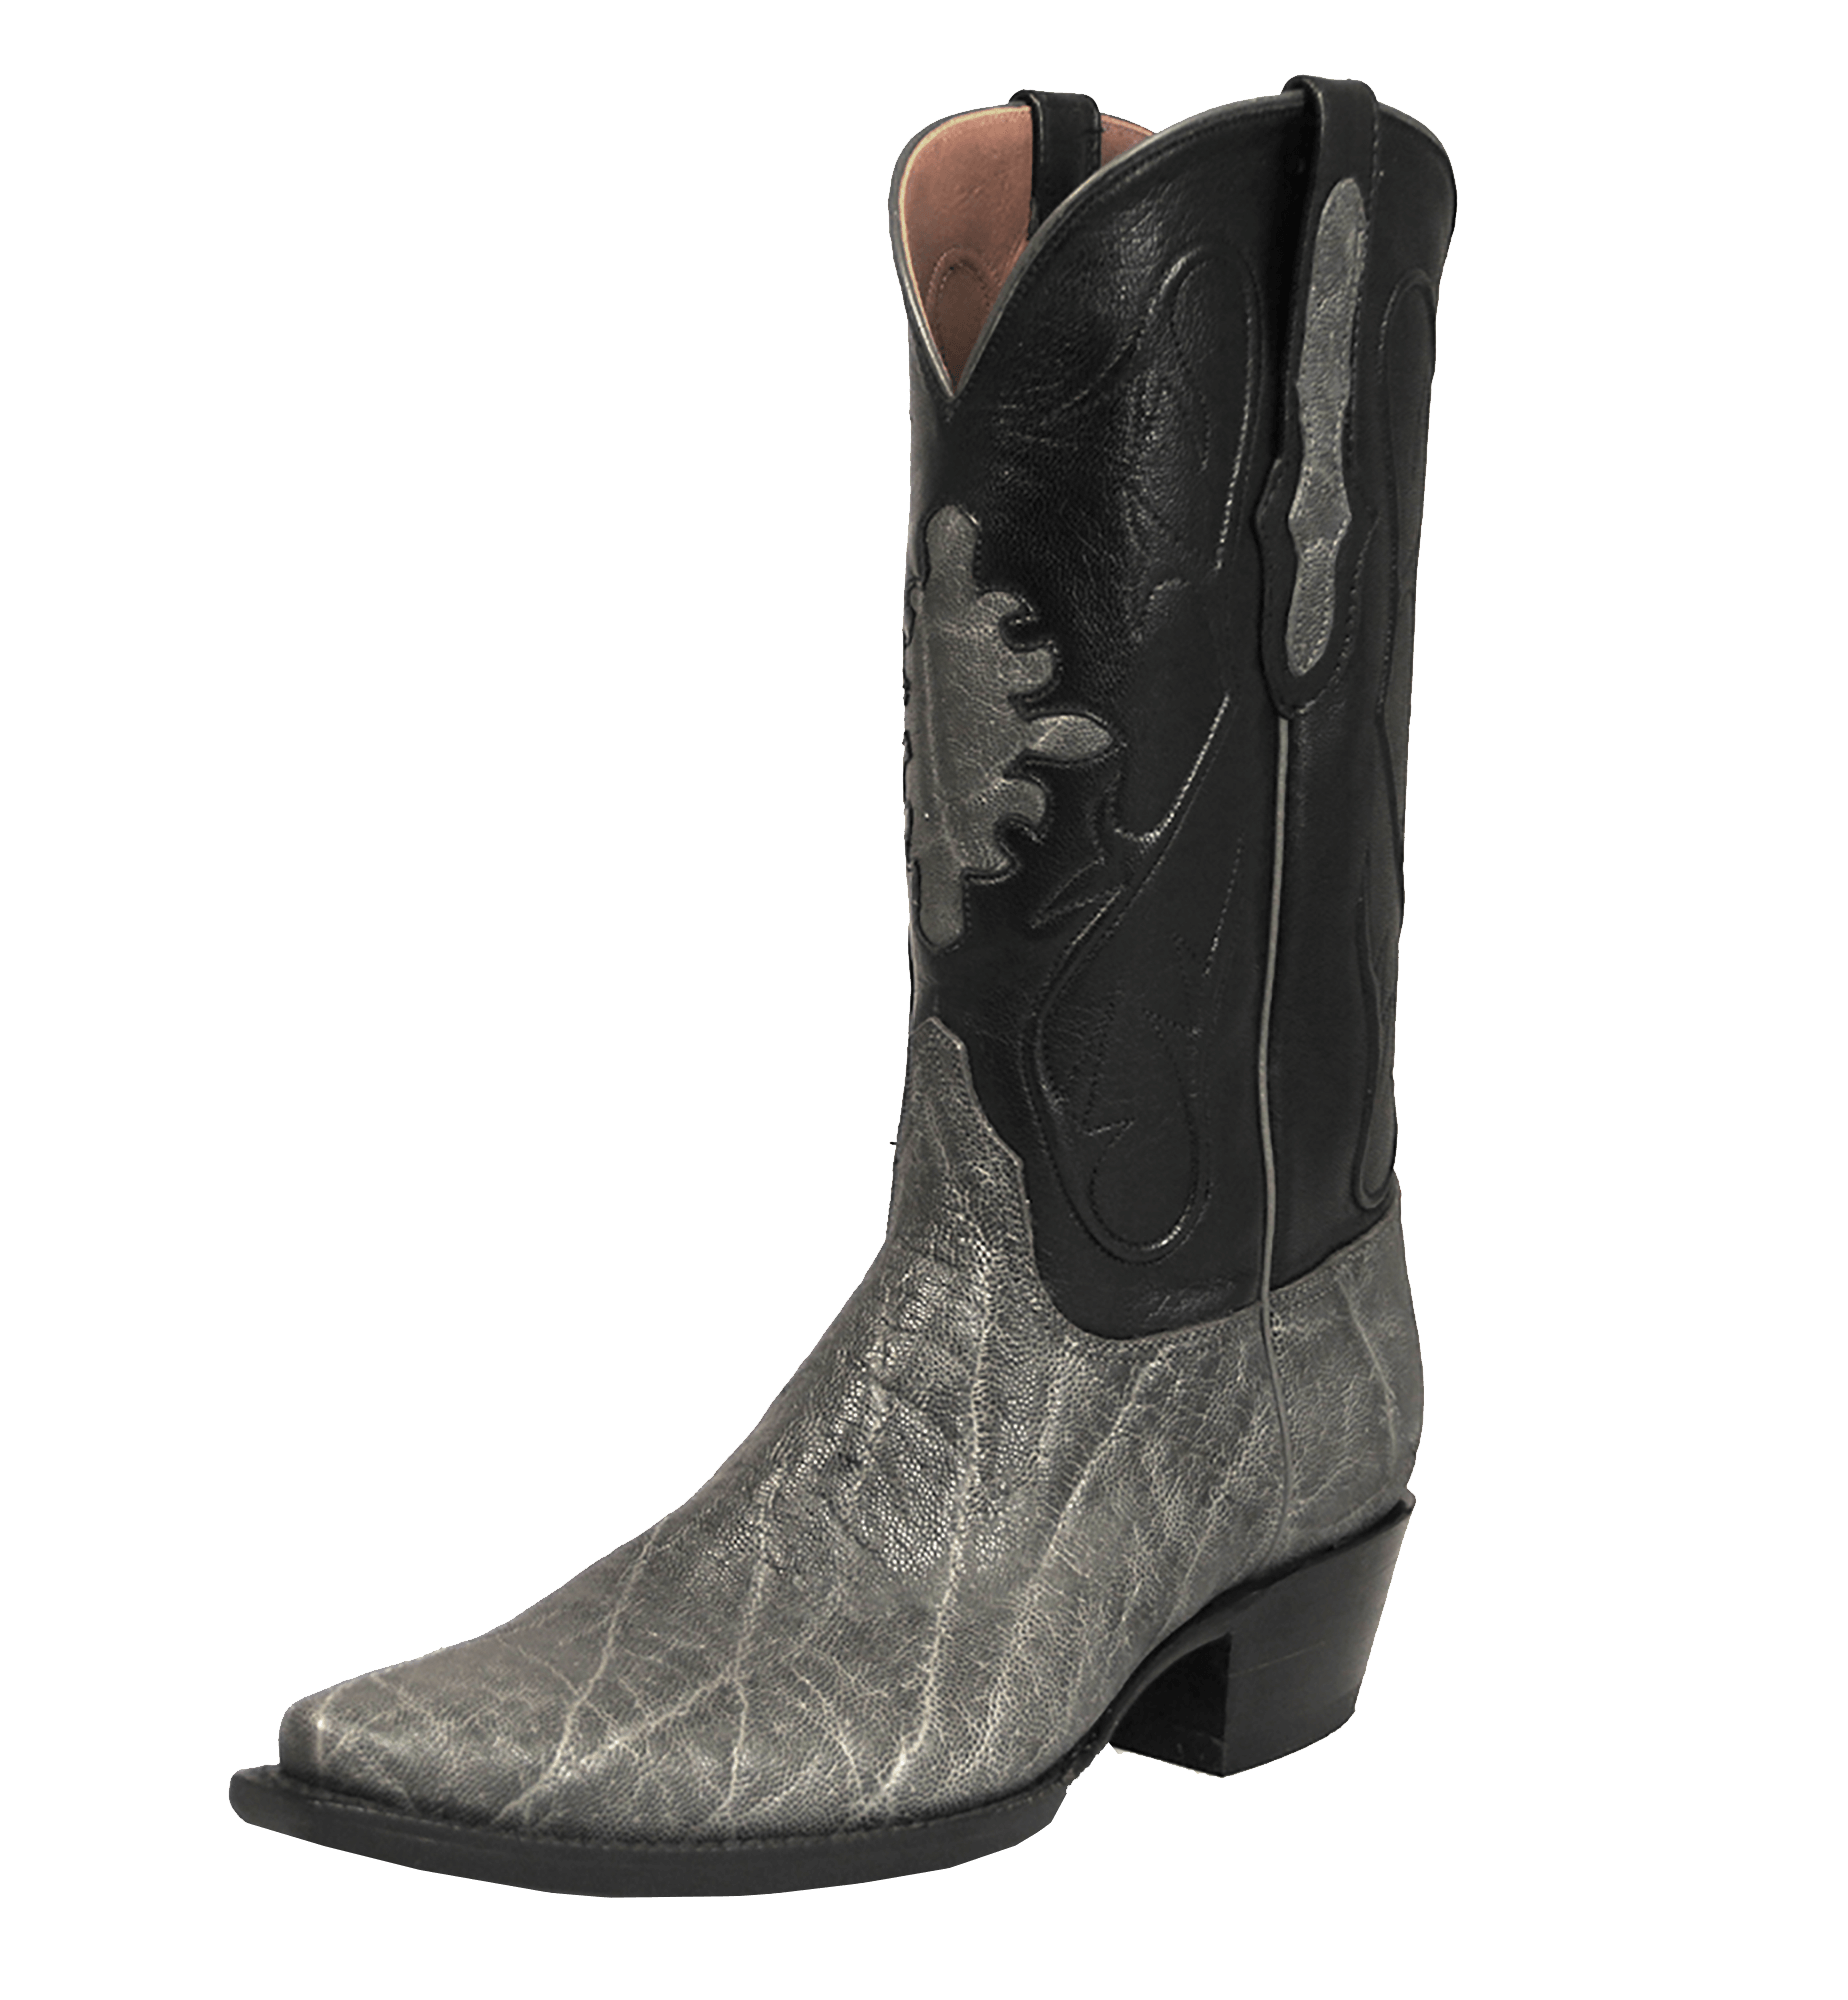 Free photo: Cowboy boots - Snakeskin, Python, Ranch - Free Download ...